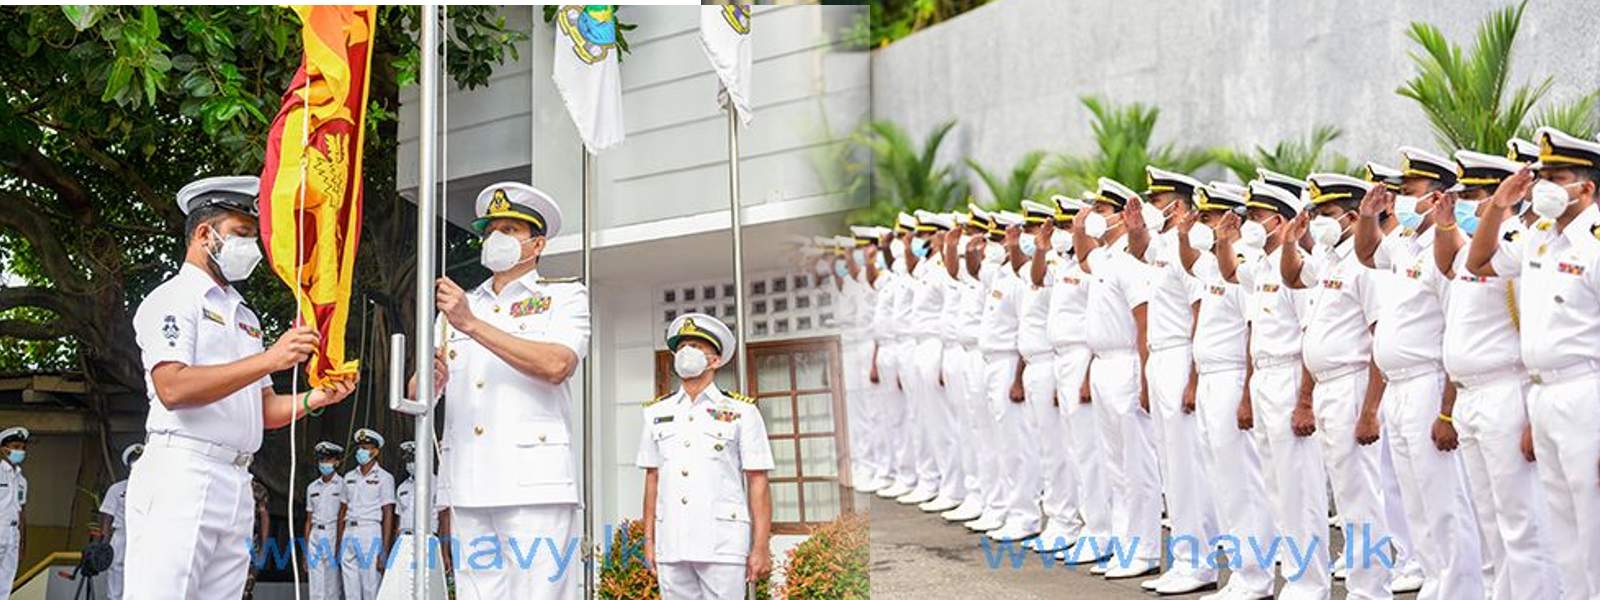 Navy begins first working day of 2022